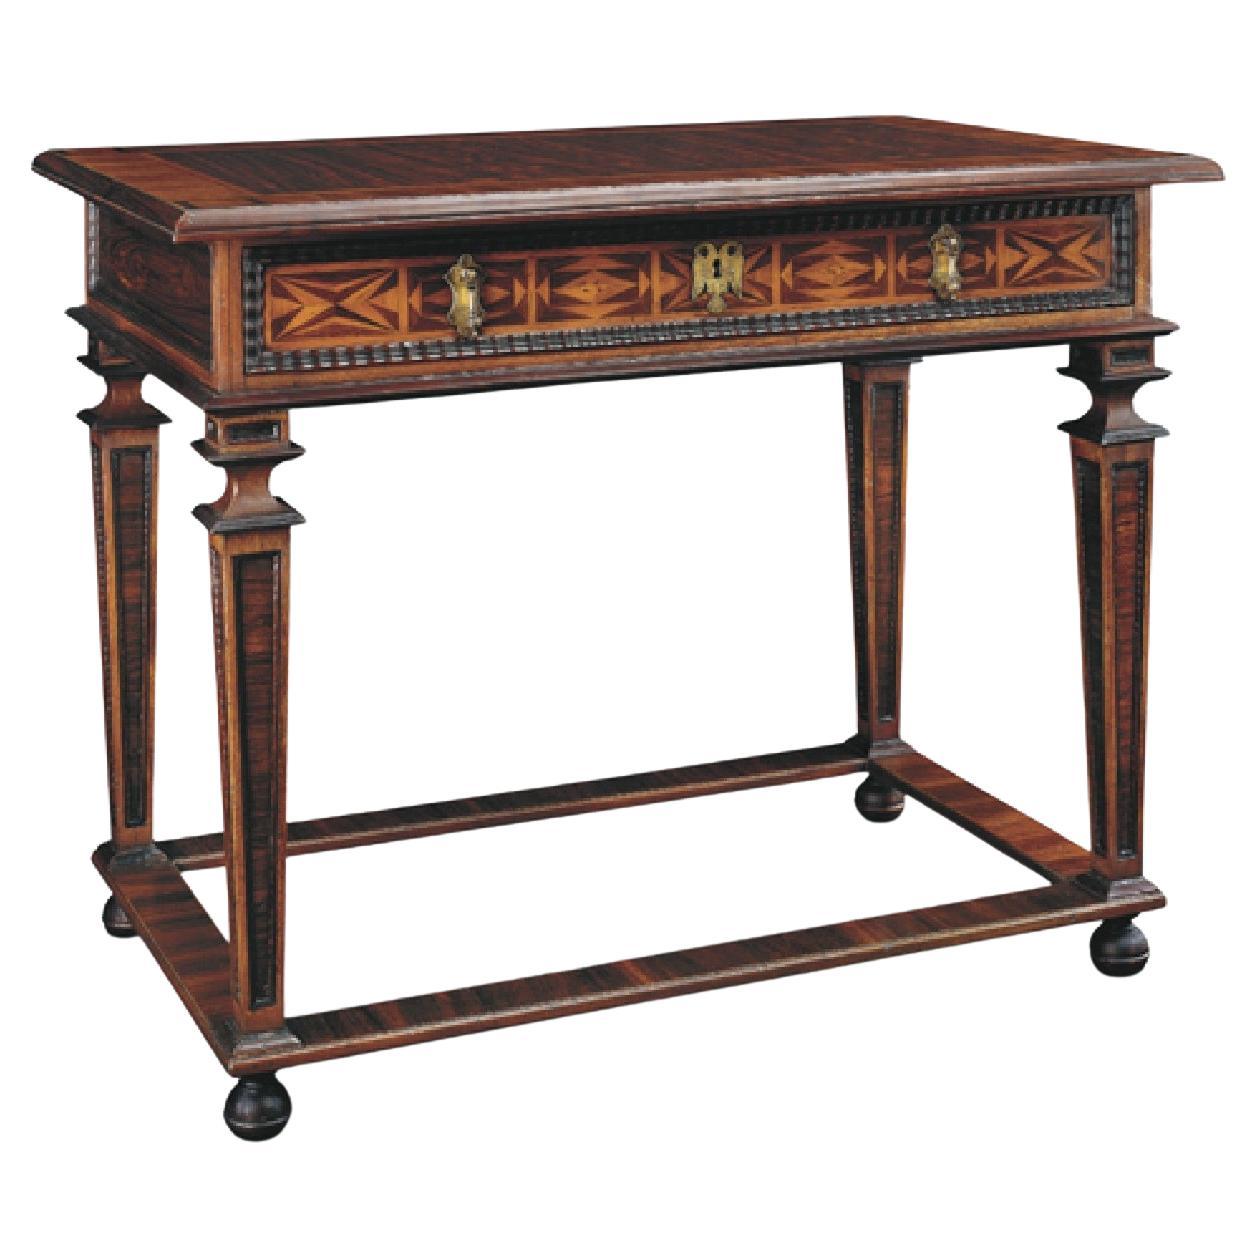 Novo Hispanic Style Tula Console with Handcrafted Portuguese Moldings& Marquetry